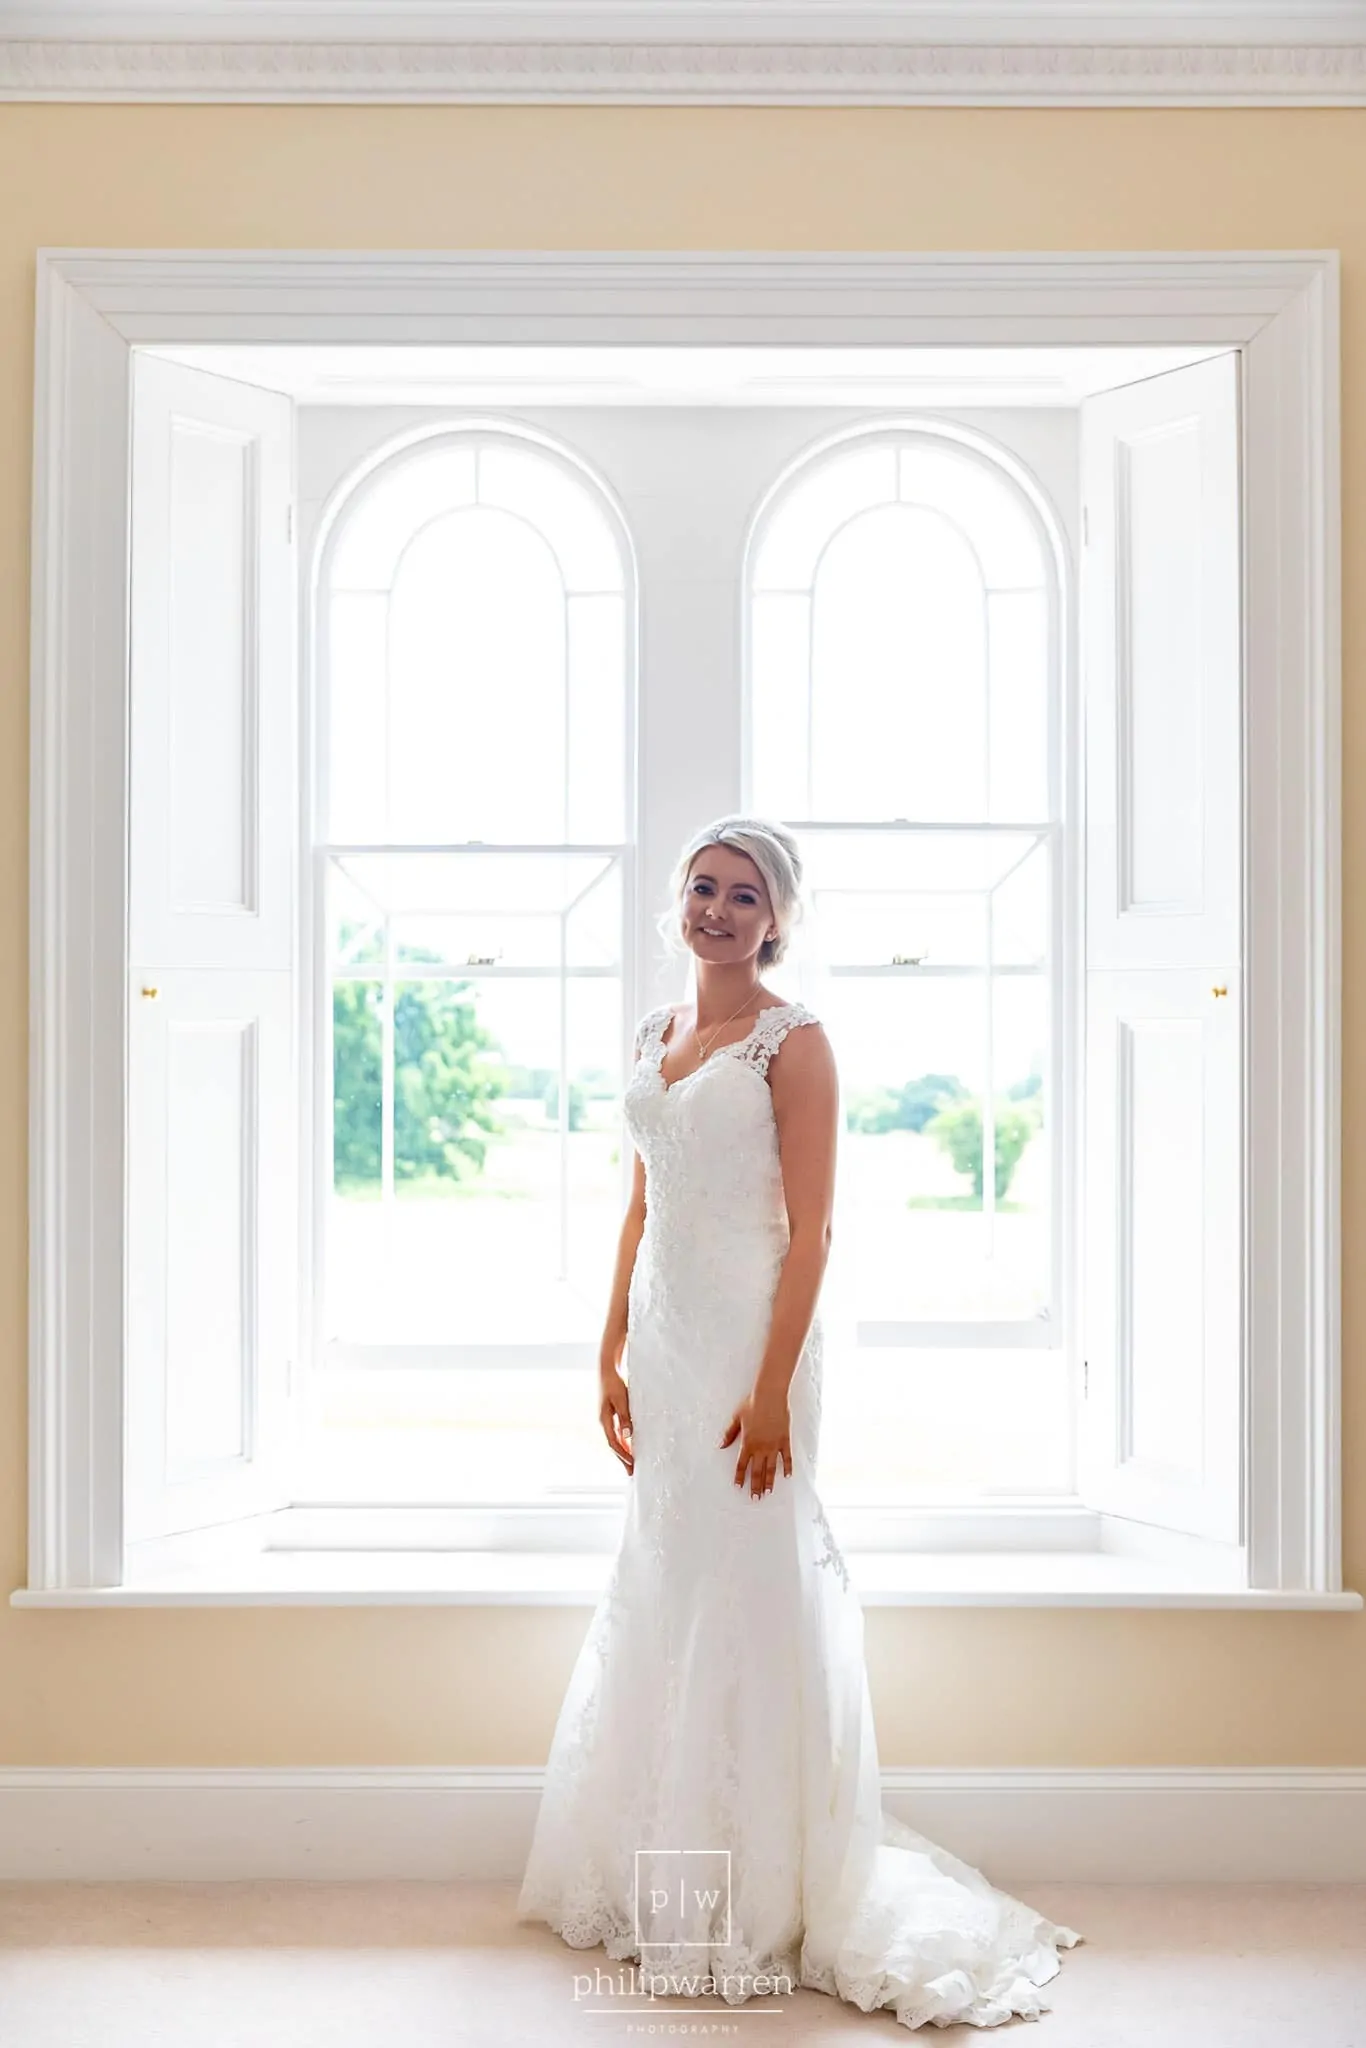 bright and light bridal protrait in the window of one of the bedrooms just before the wedding ceremony